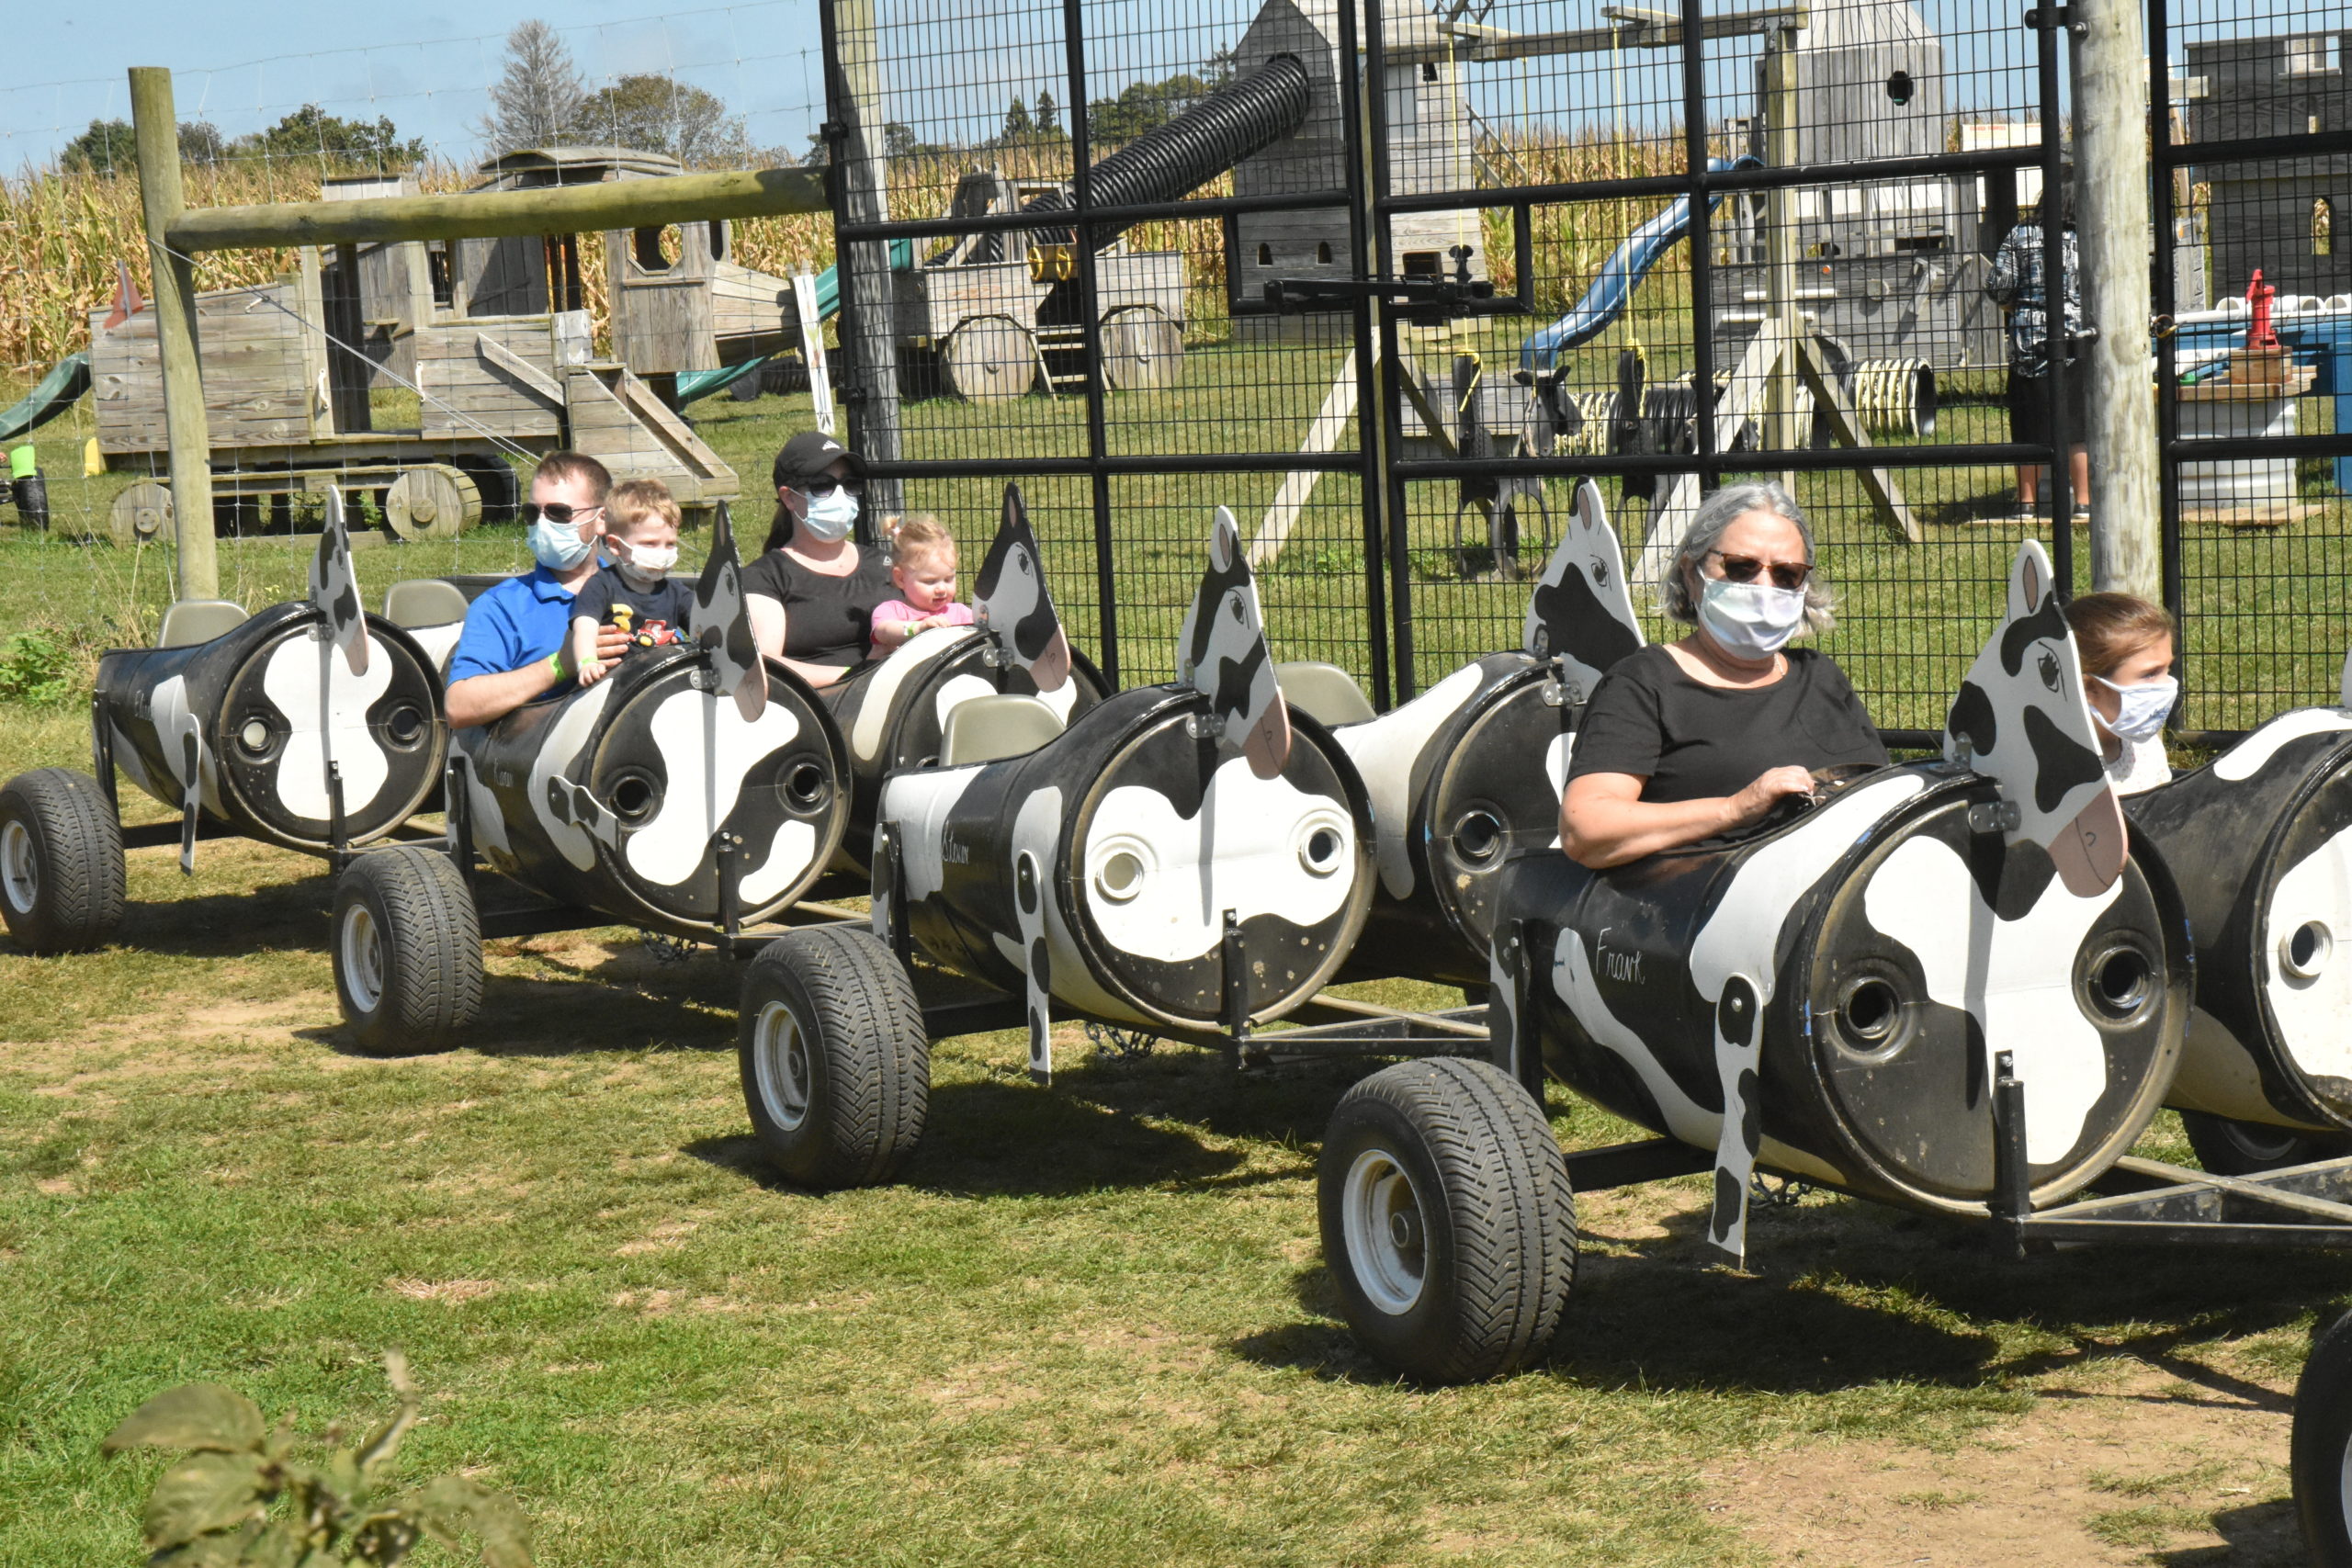 Riders on the cow train get a tour of Seven Ponds Orchard in Water Mill on Sunday. STEPHEN J. KOTZ